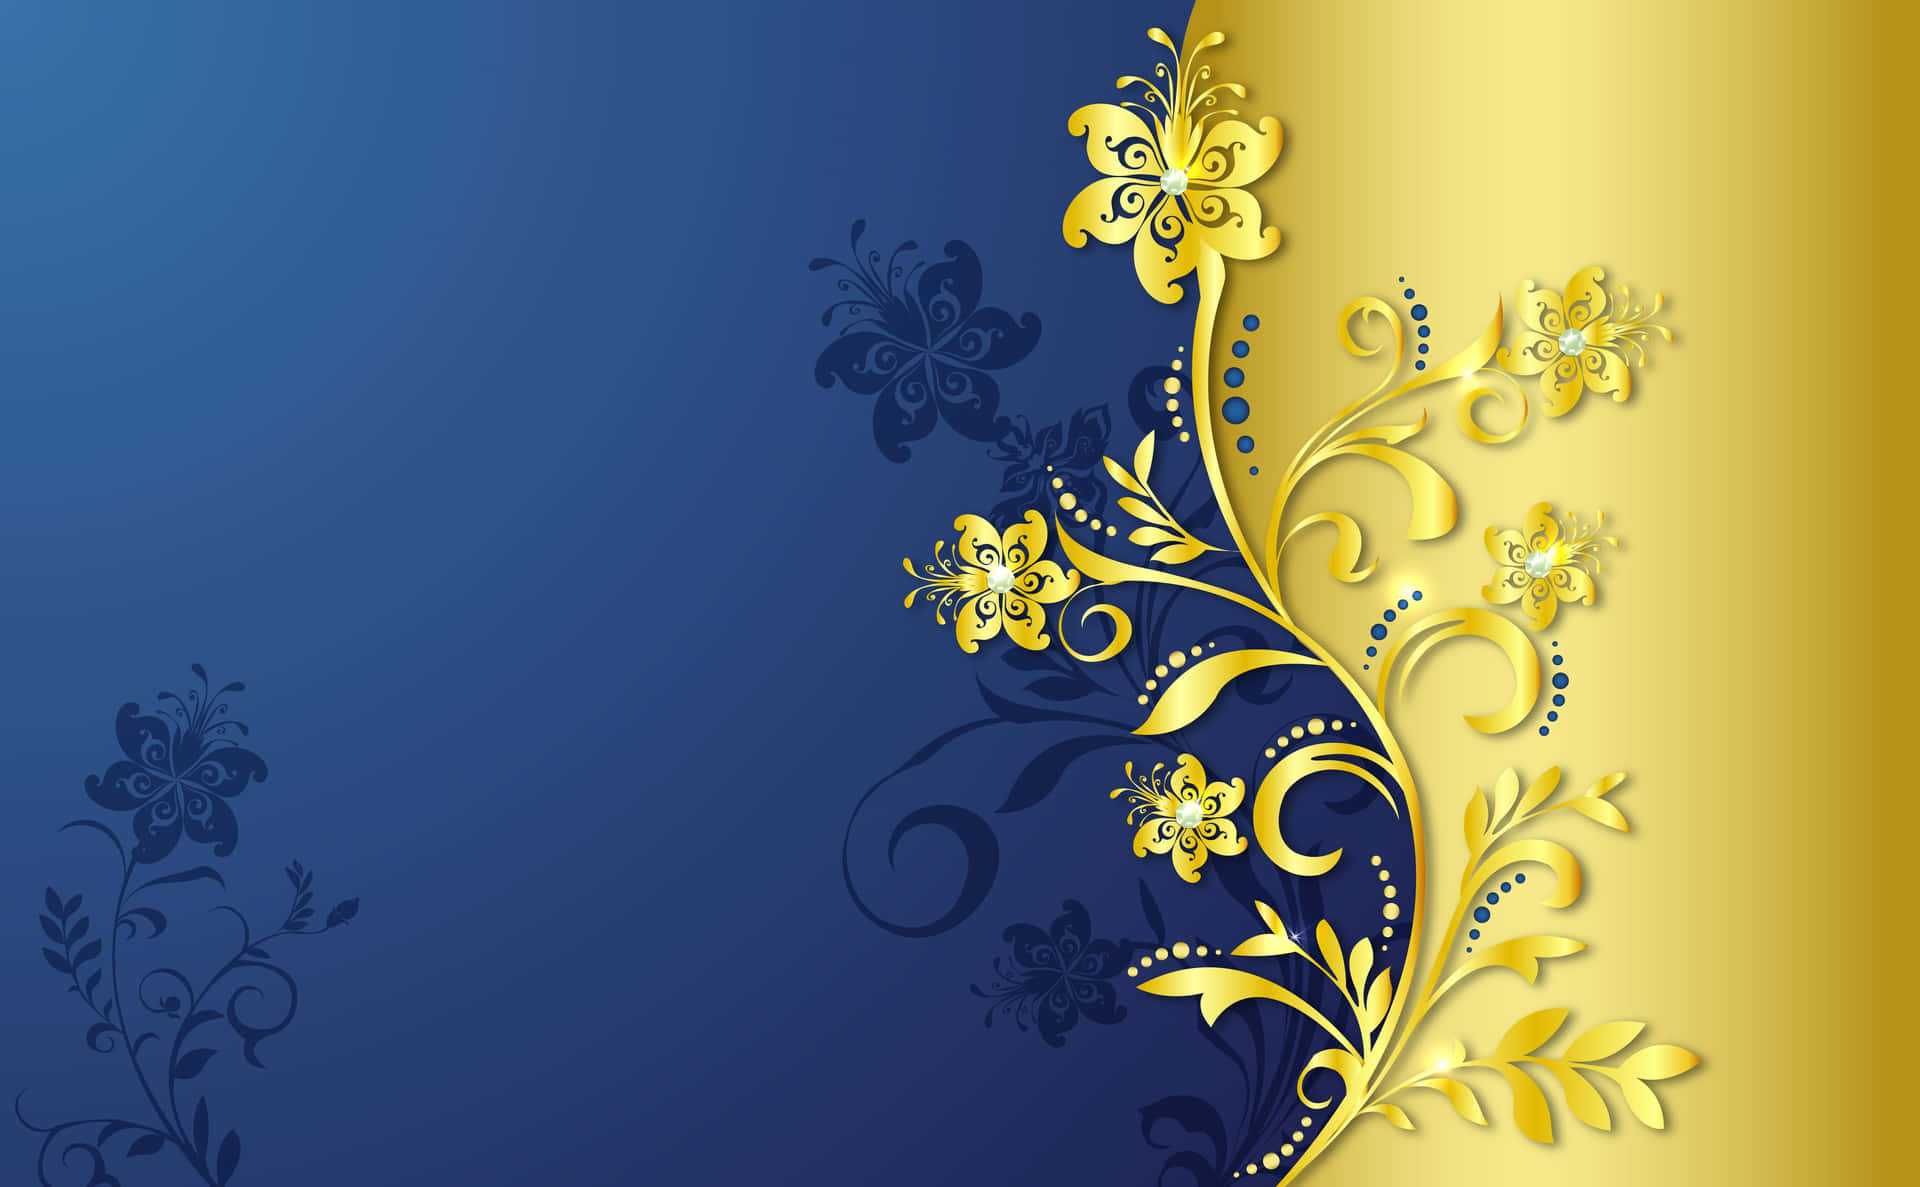 Download A Gold And Blue Background With Flowers | Wallpapers.com